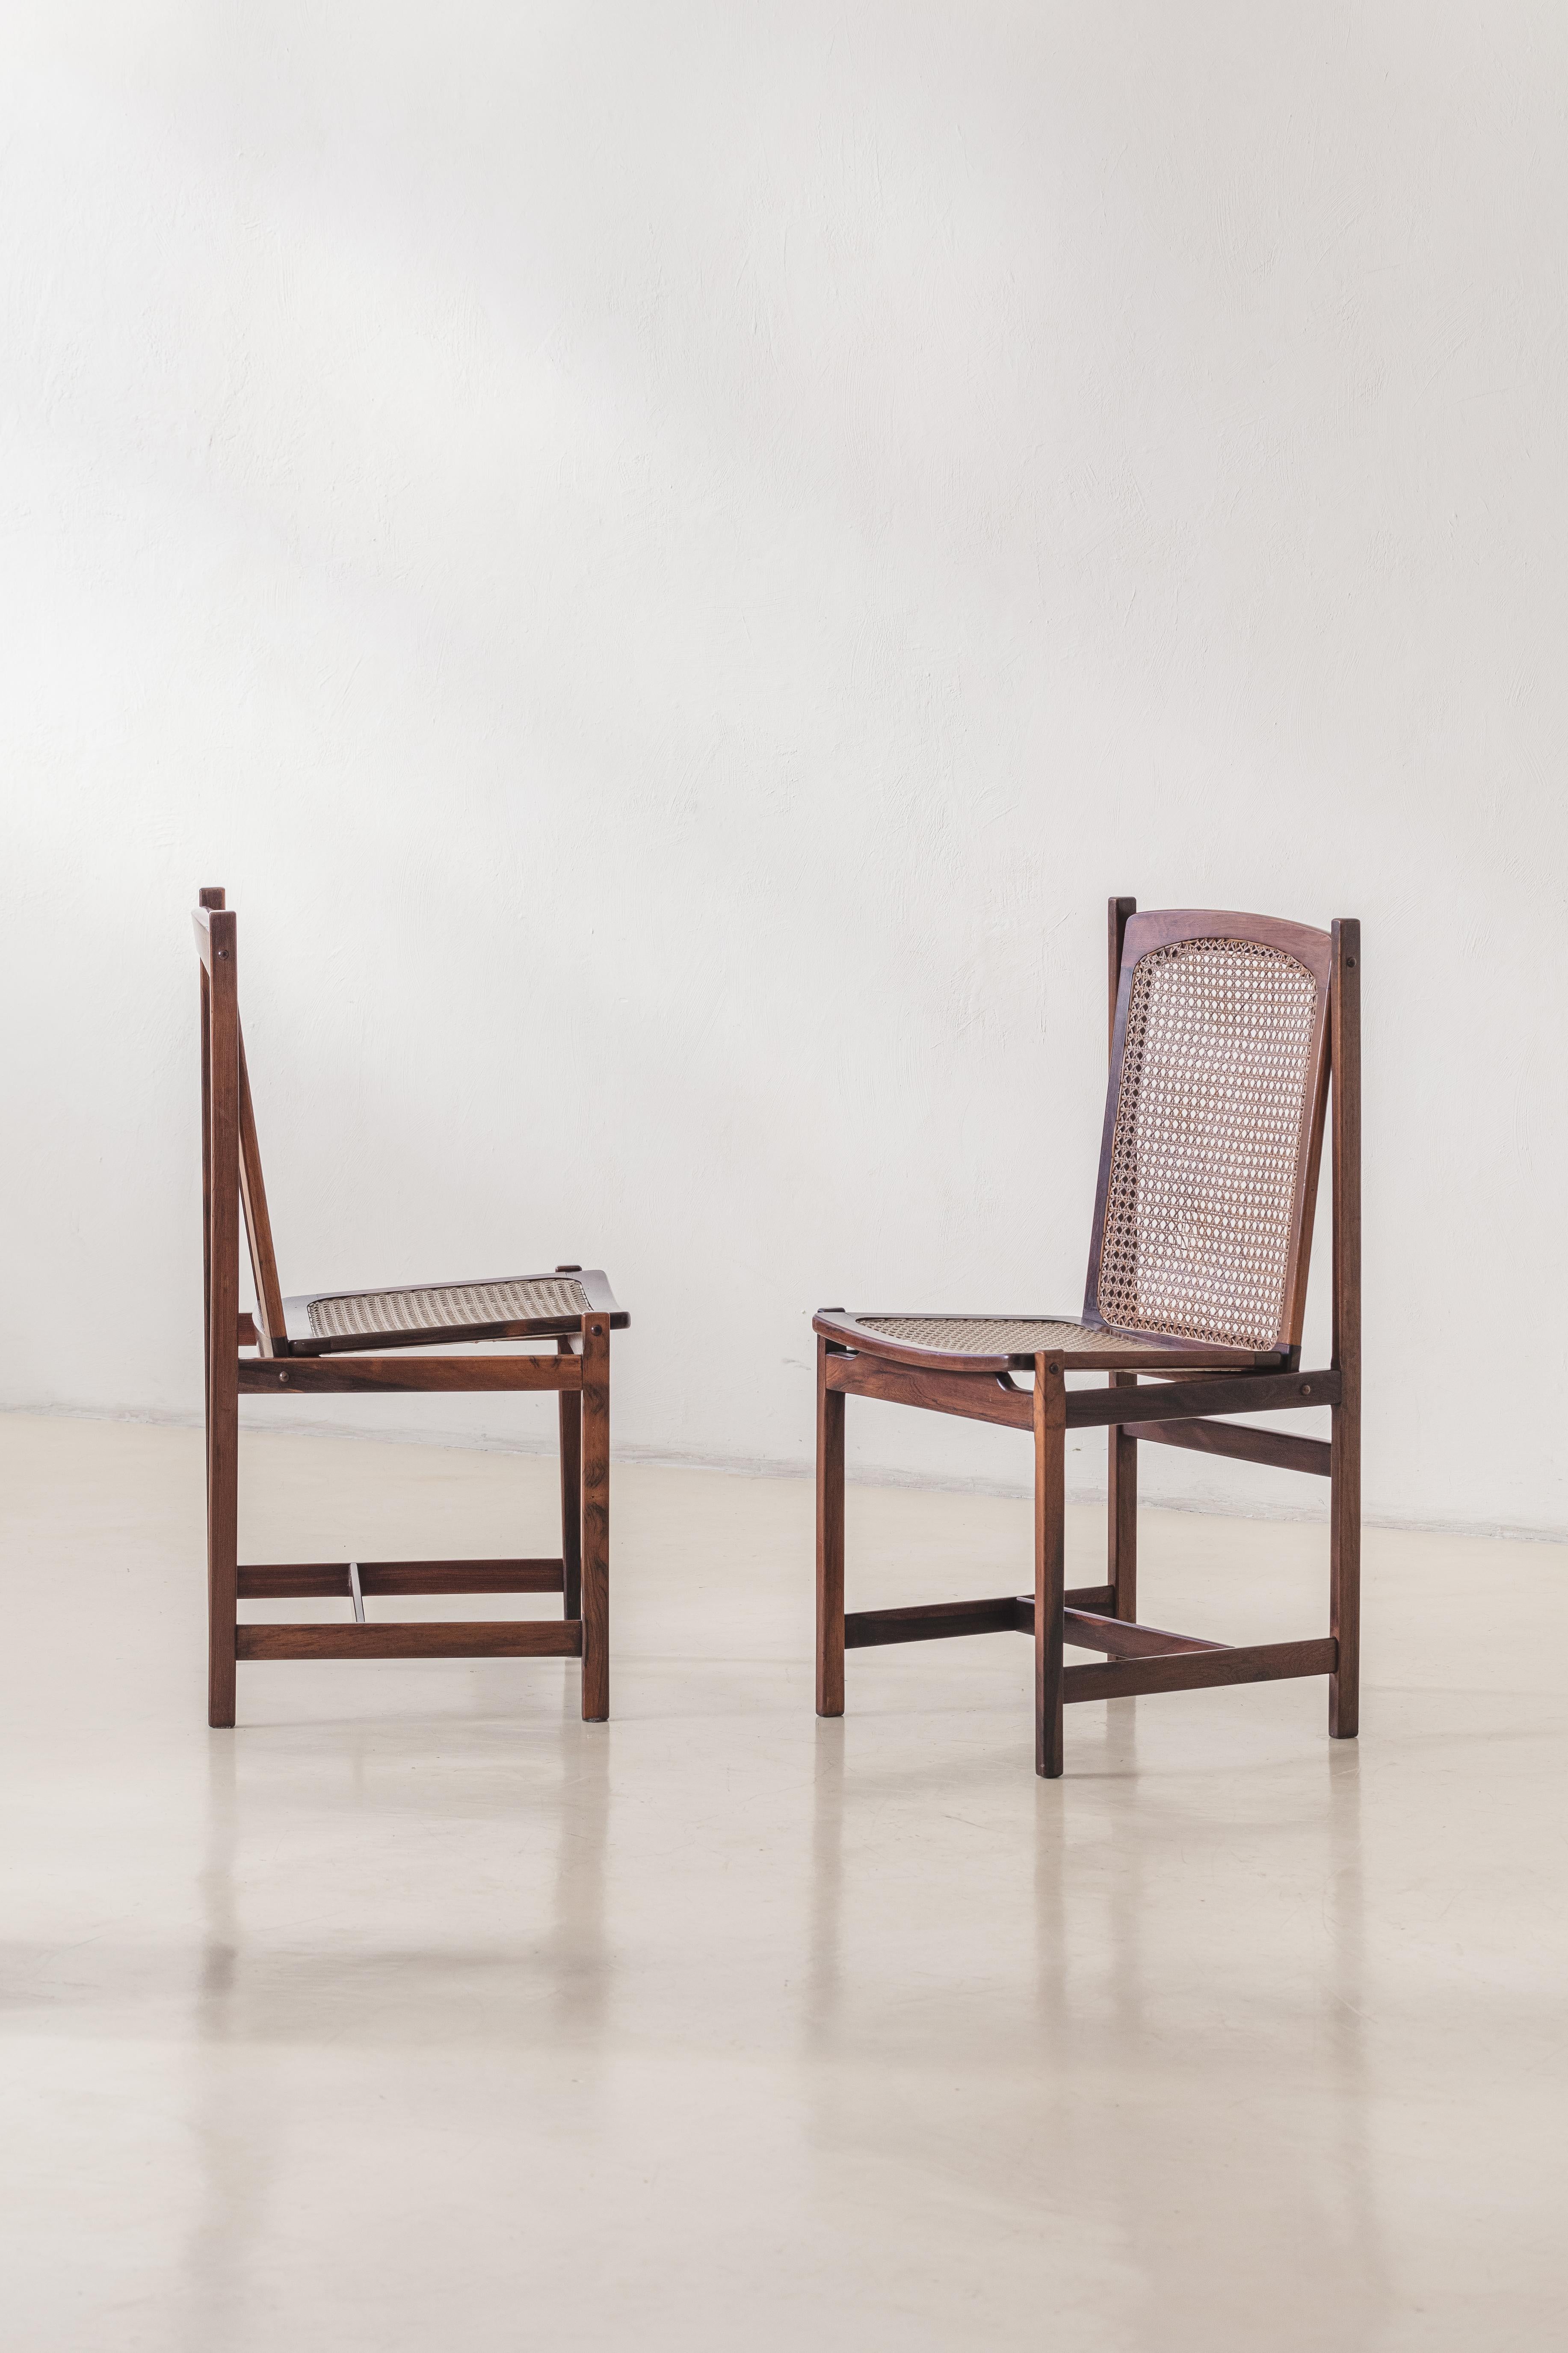 Celina Decorações Set of Six Dining Chairs, Rosewood and Cane, Midcentury 1960s For Sale 1